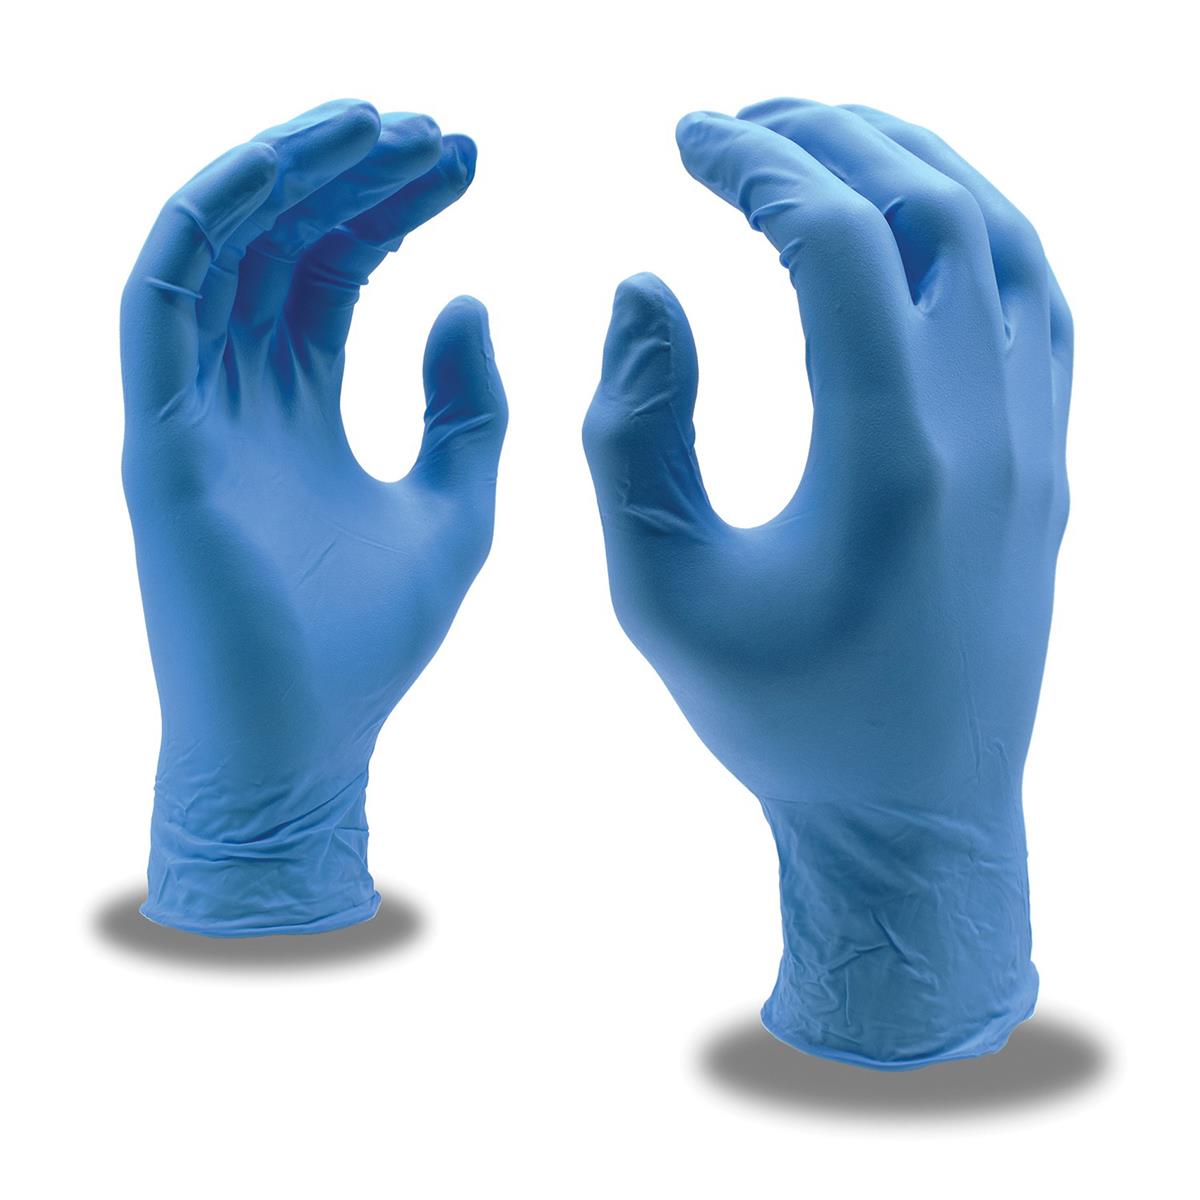 Image of Sysco Nitrile Food Service Gloves